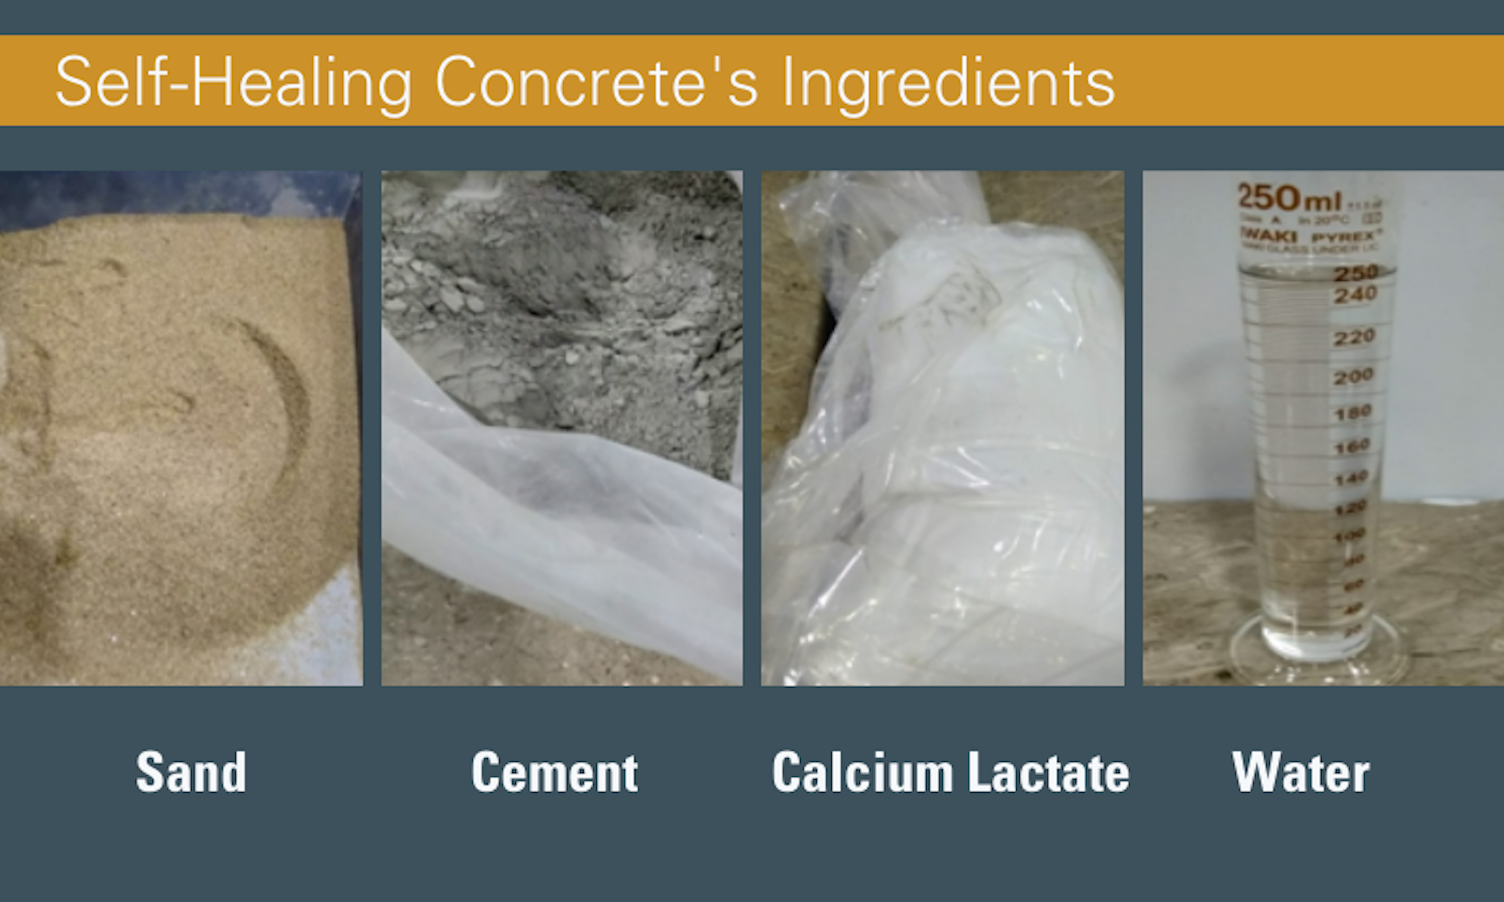 How Self Healing Concrete Performs Results of an Experiment Conducted in SGS Karachi Laboratory